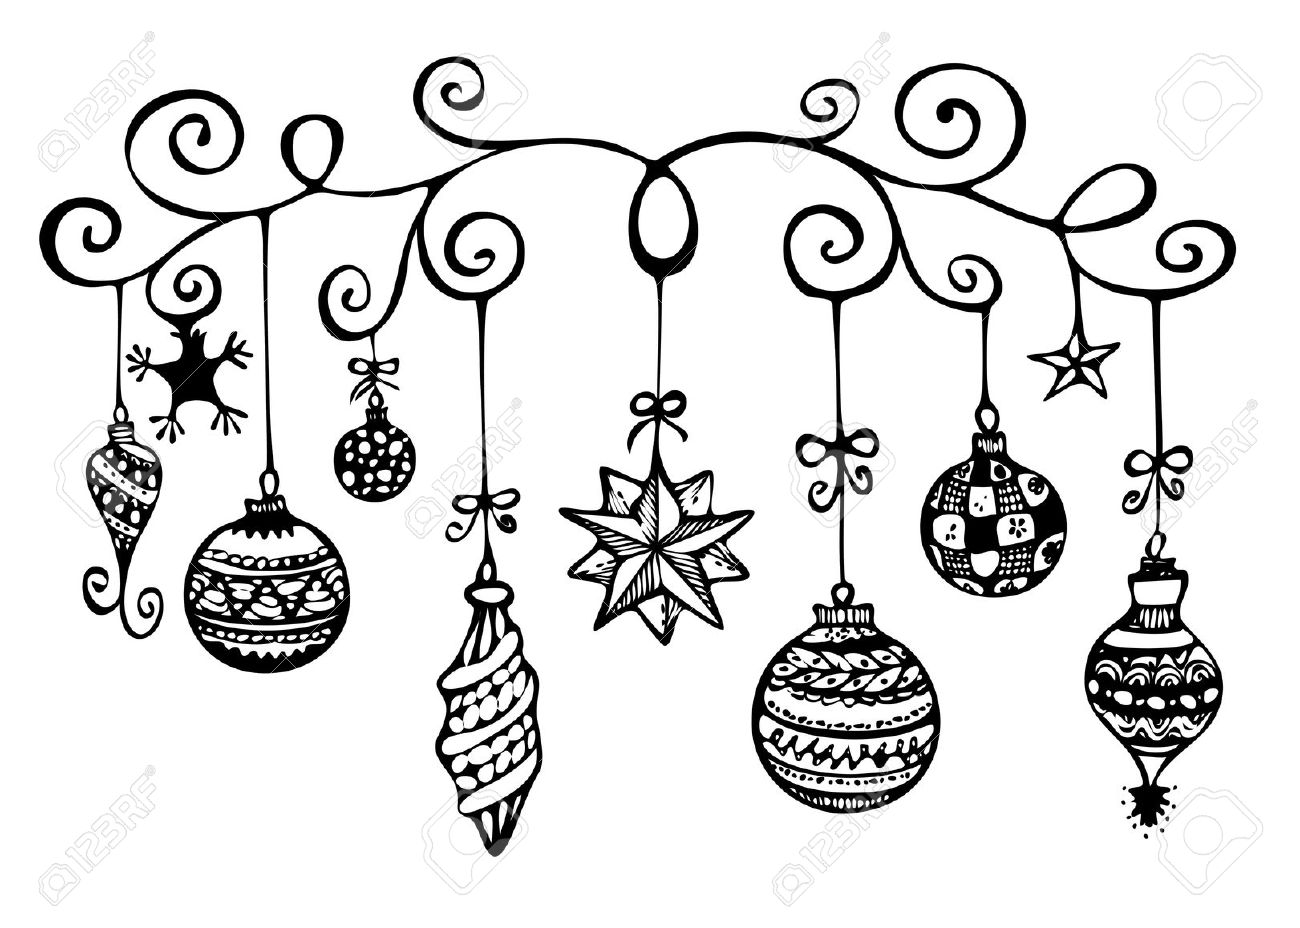 Black And White Christmas Ornaments Clipart.